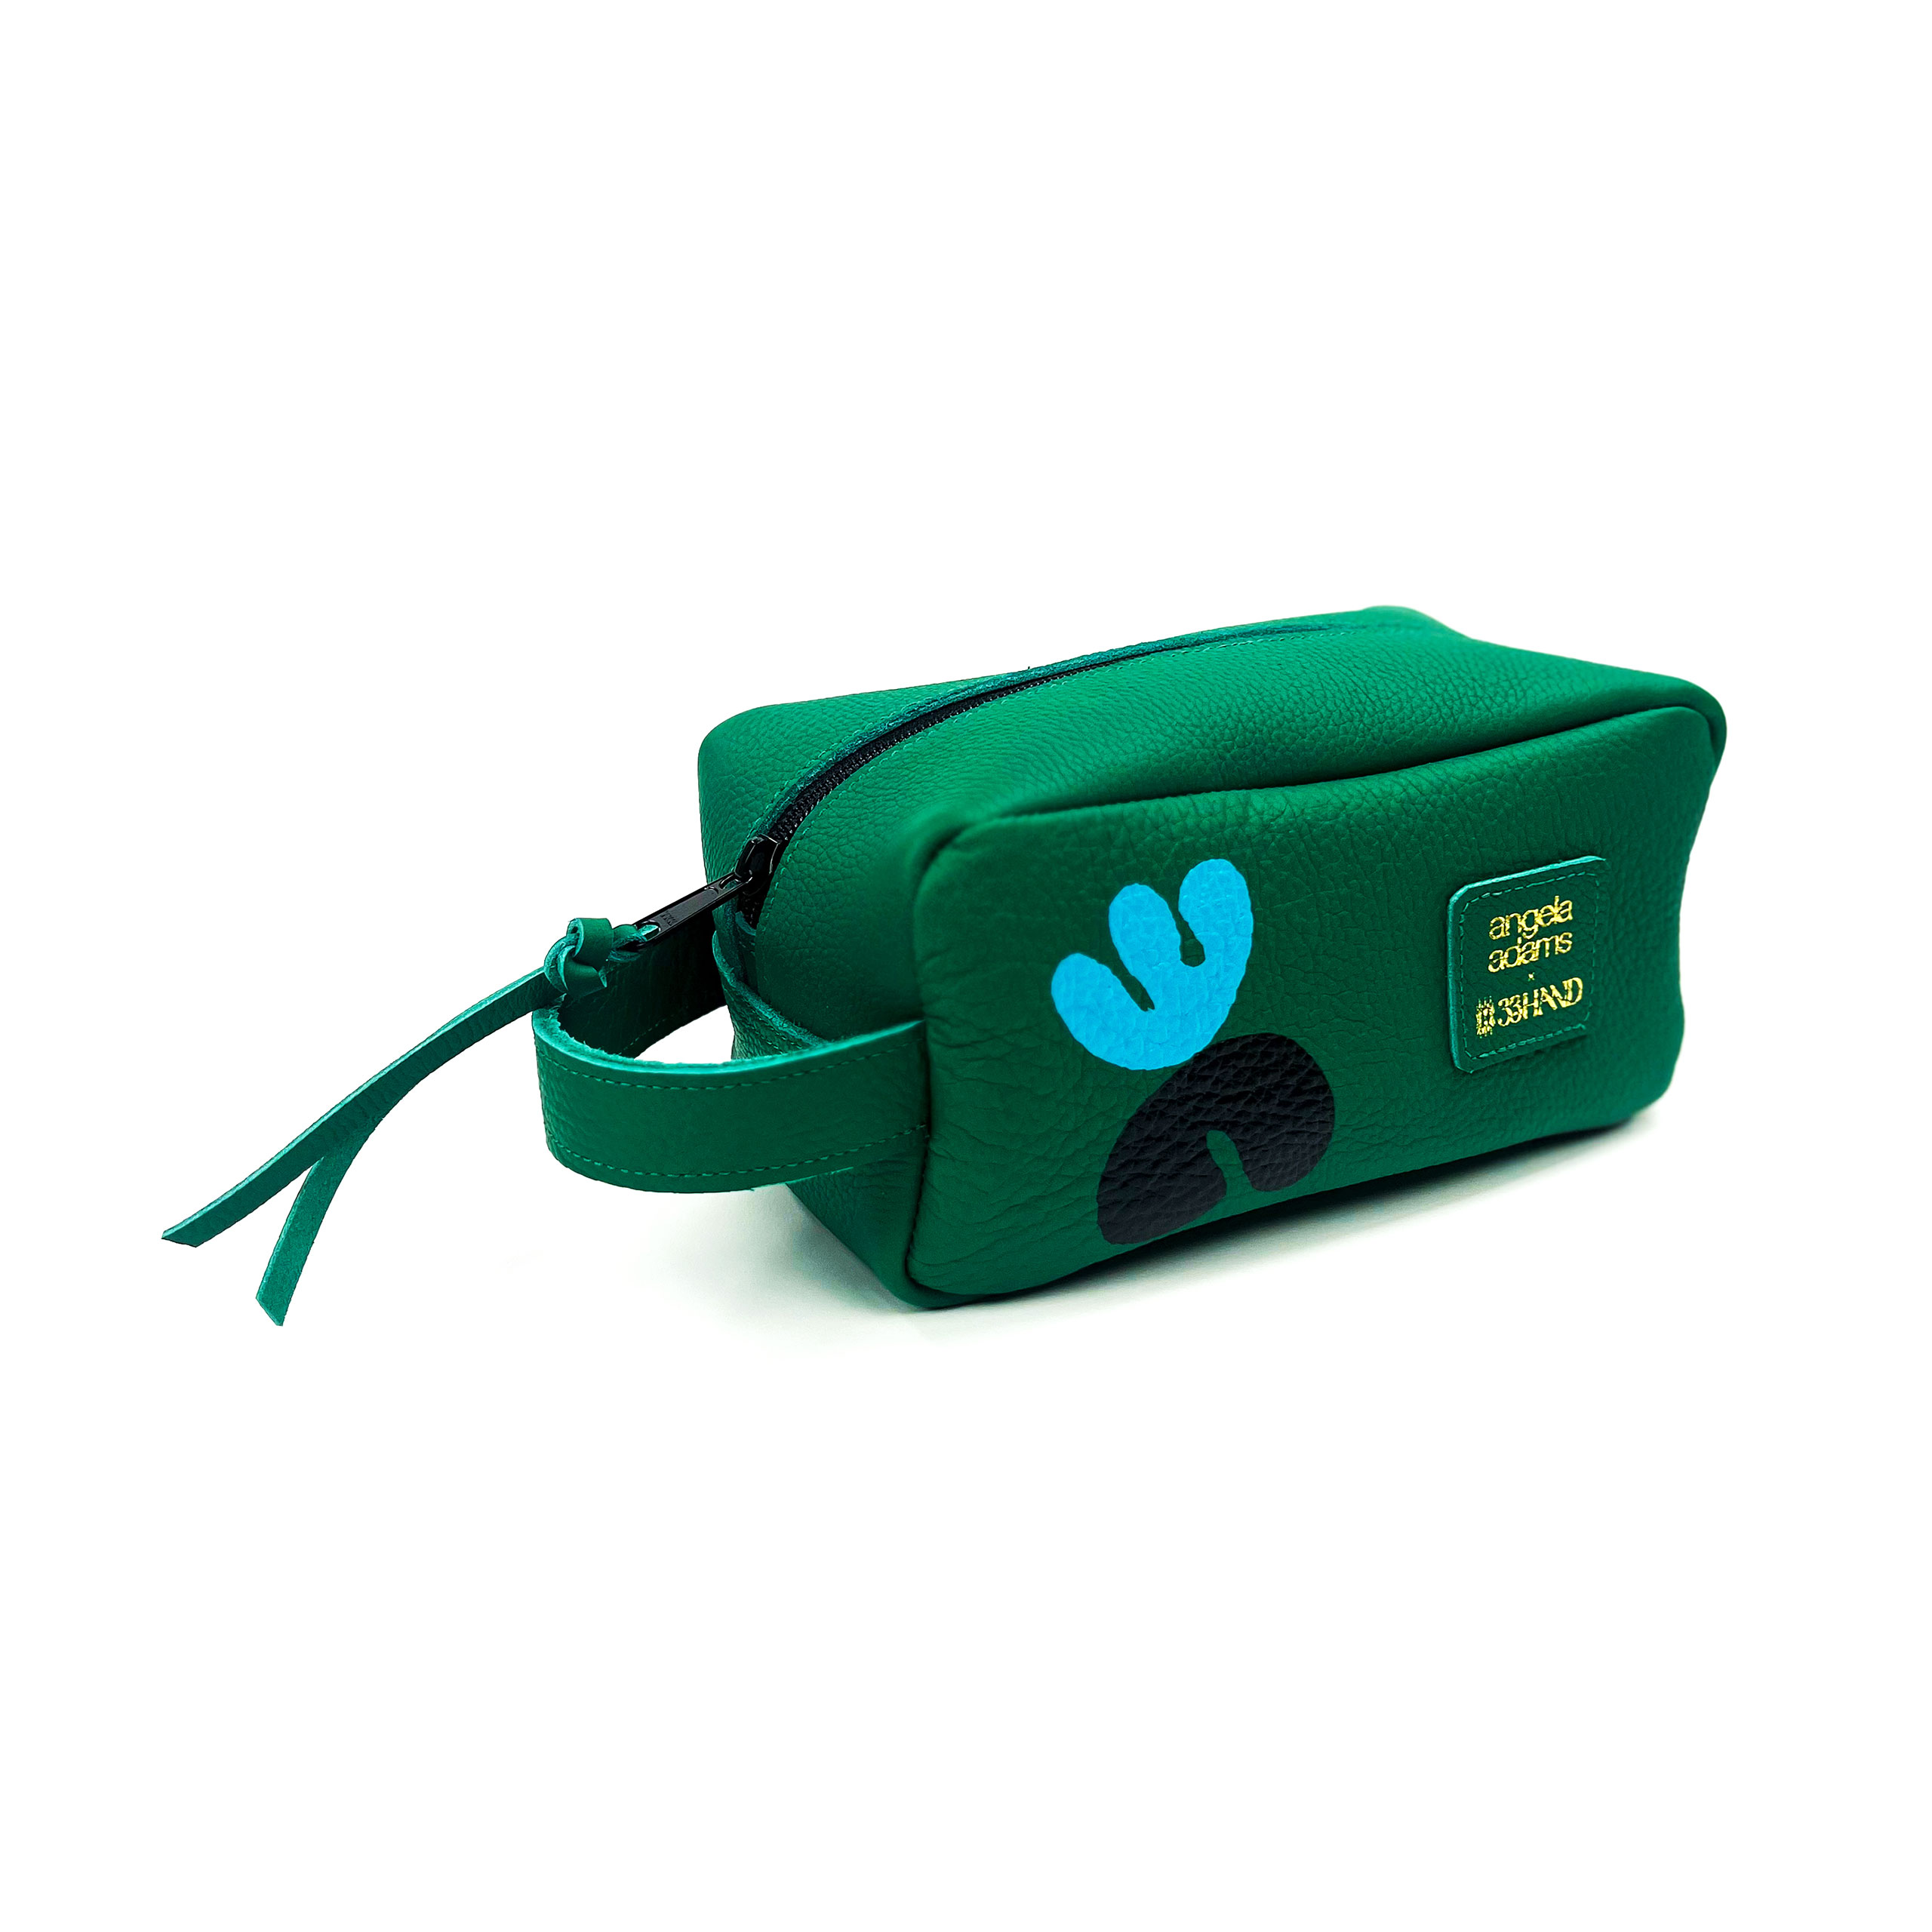 Green cosmetic bag with a blue handprint logo and text on the side, positioned against a white background.